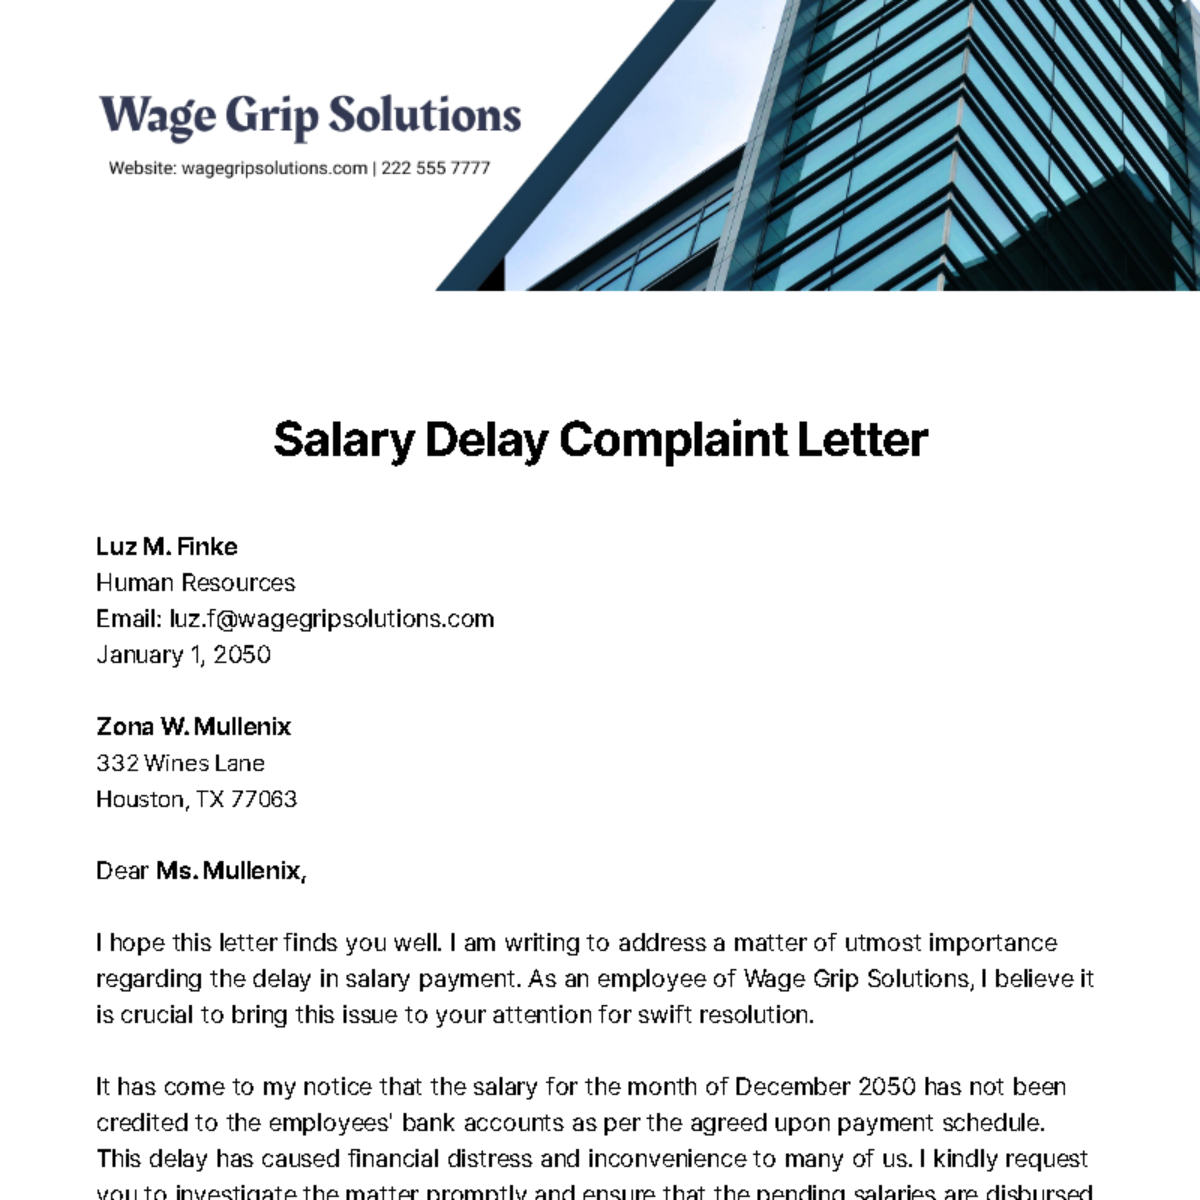 Salary Delay Complaint Letter Template